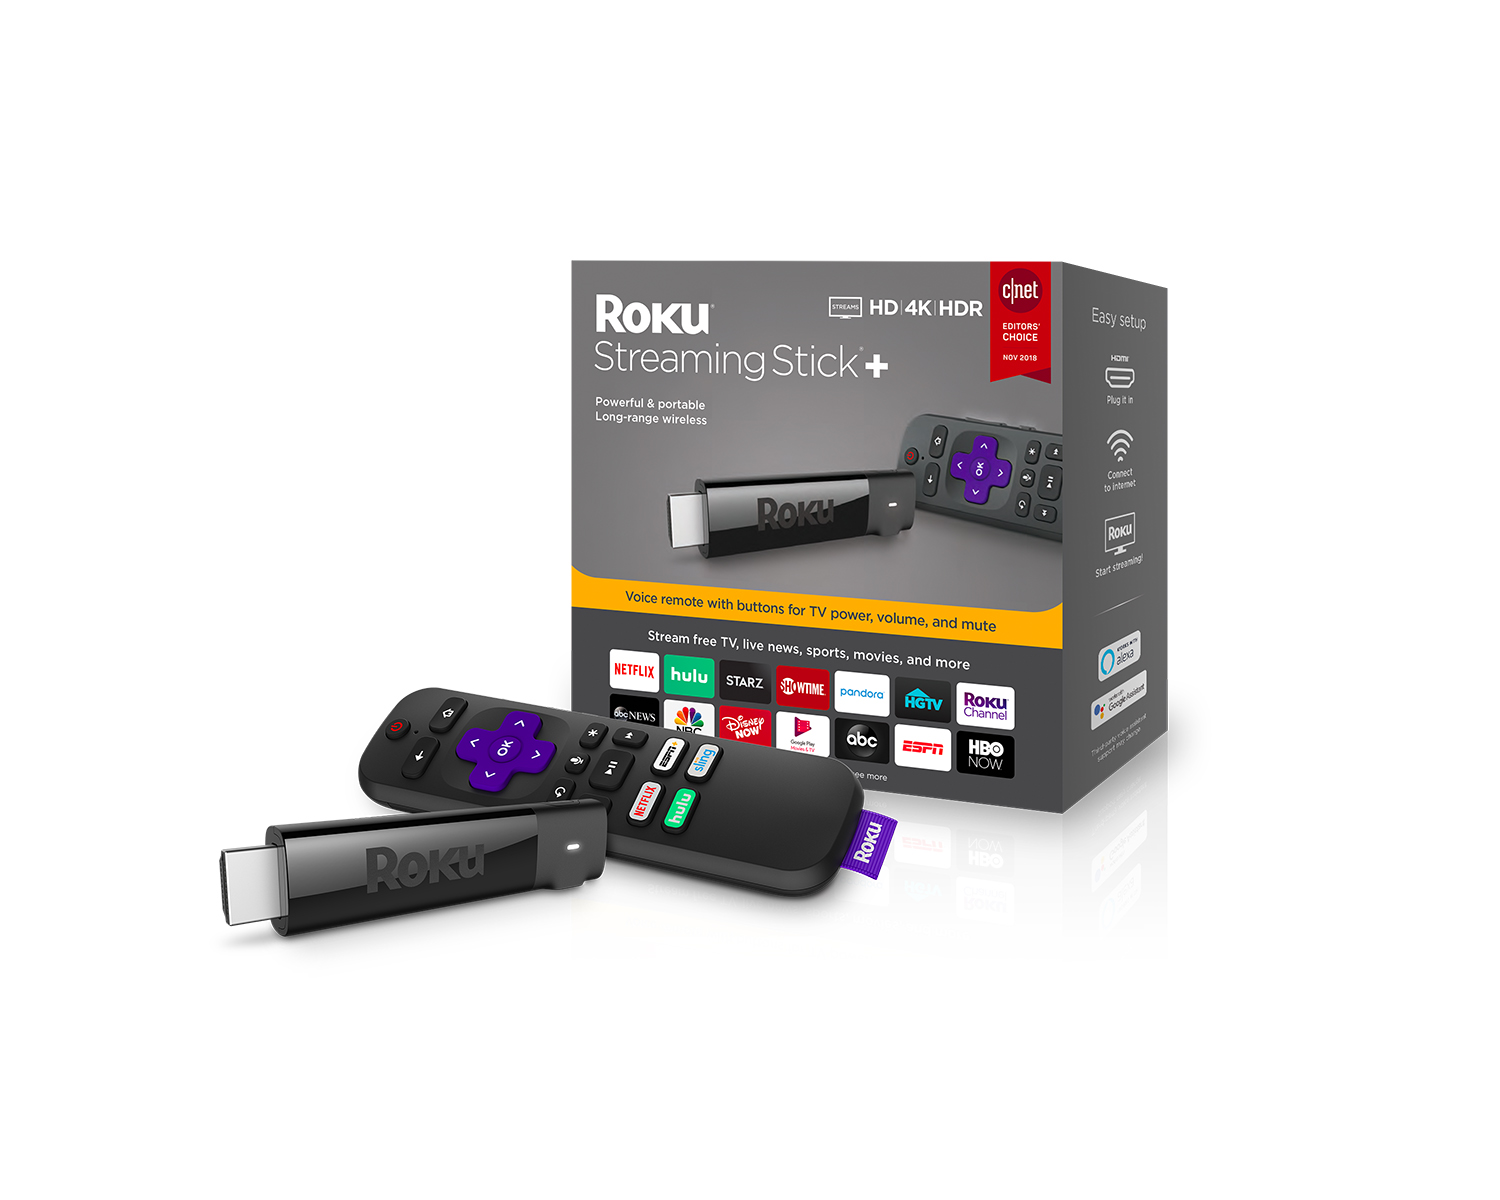 EXPIRED: The Roku Stick+ With a 4K HDR is Just $29.99 For Cyber Monday